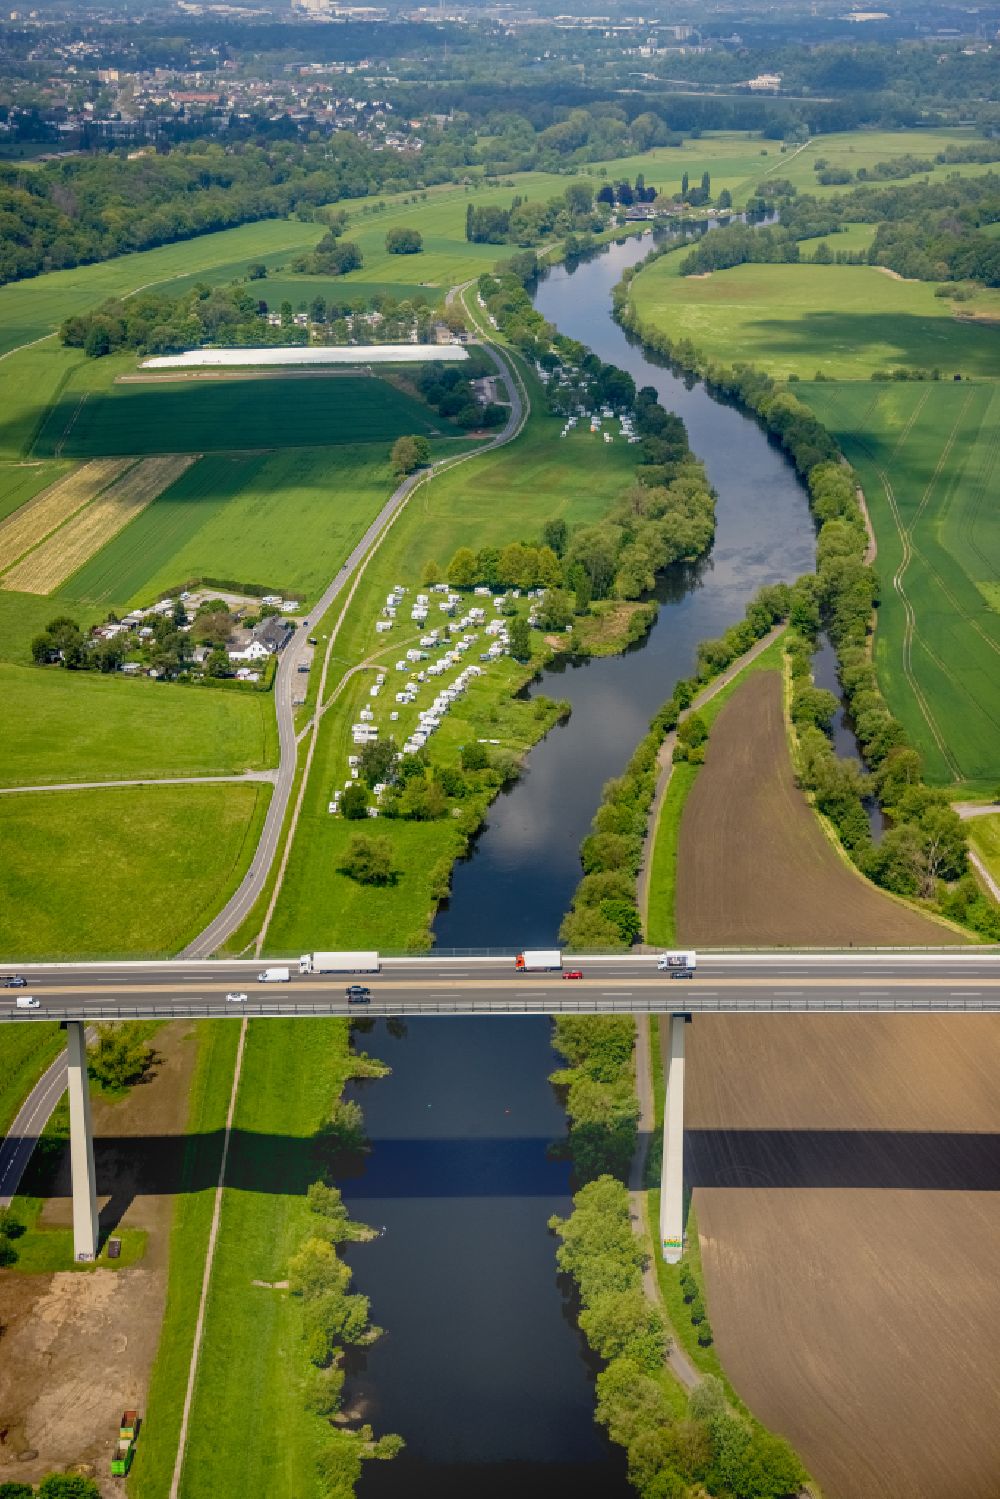 Mintard from above - routing and traffic lanes over the highway bridge in the motorway A 52 over the shore of river Ruhr in Muelheim on the Ruhr in the state North Rhine-Westphalia, Germany